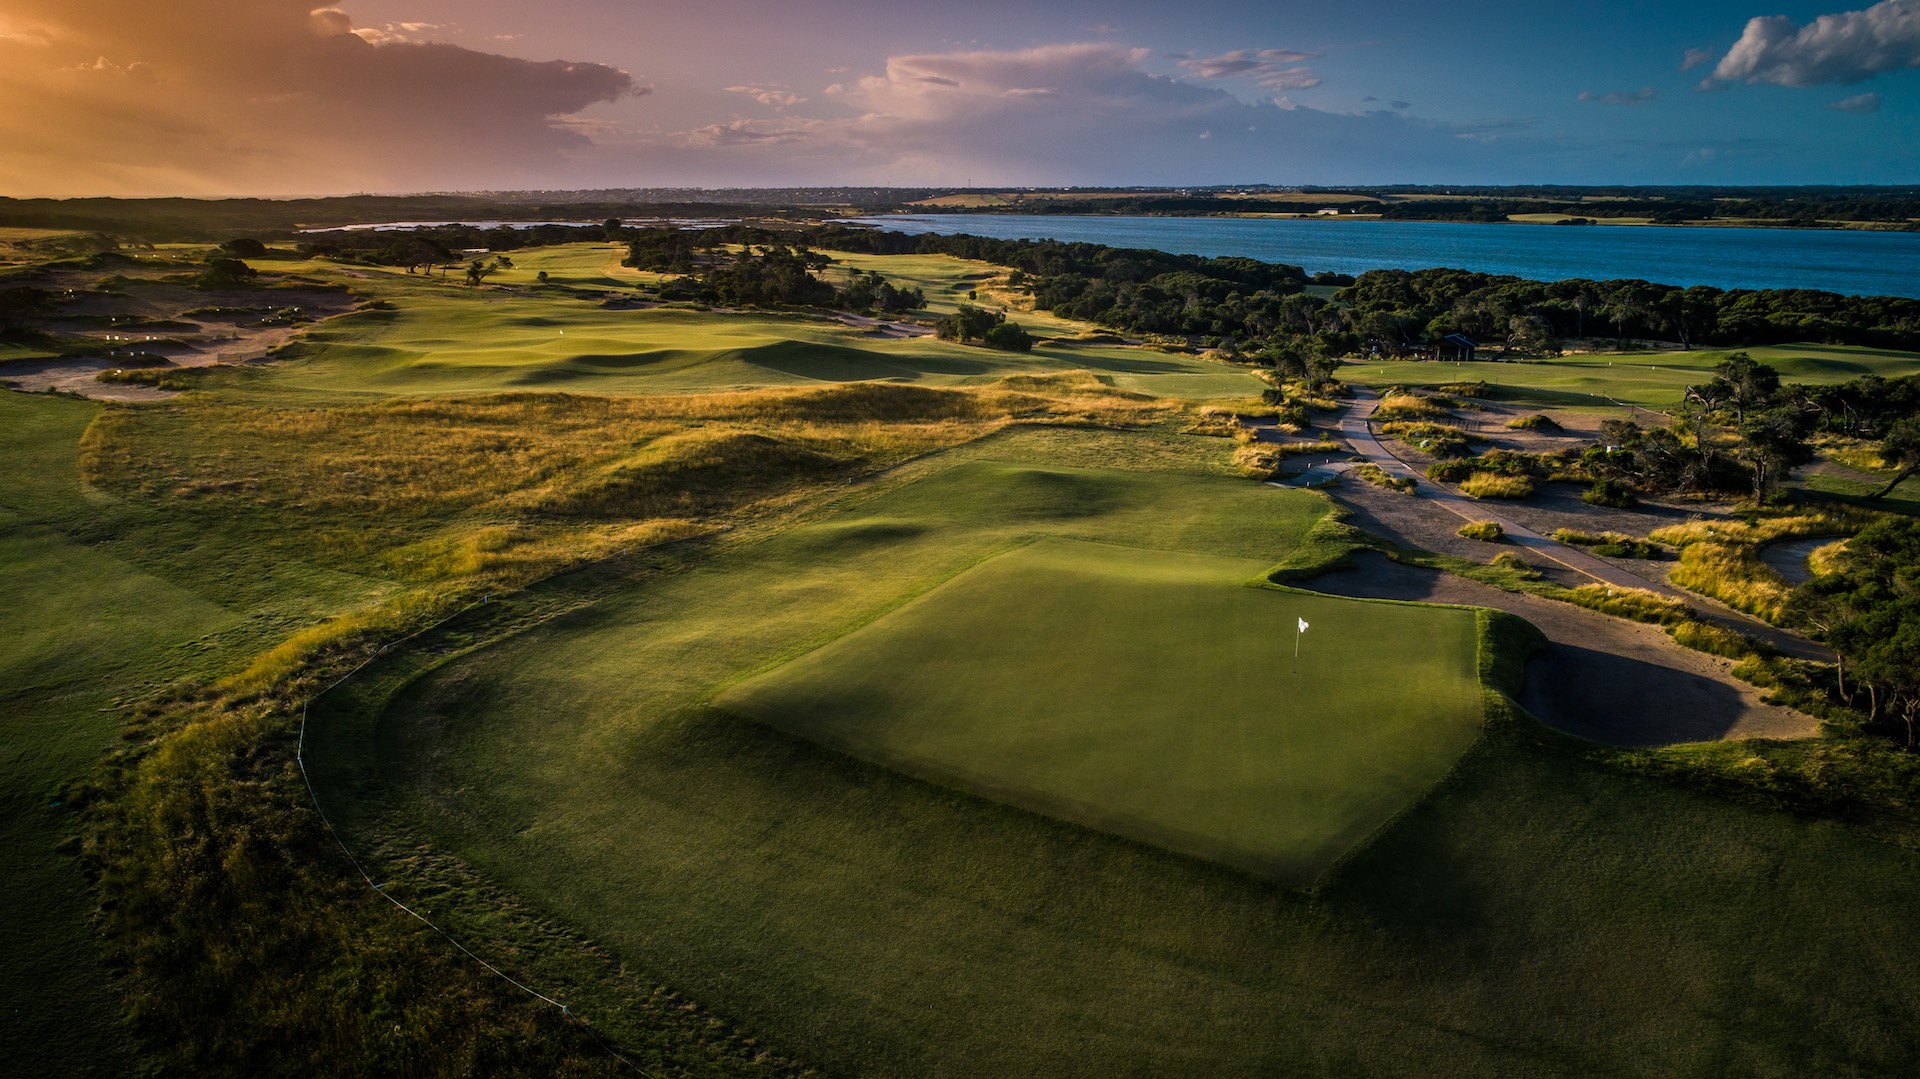 This top private course gave its public neighbor a spectacular lift<br>Jan 2022